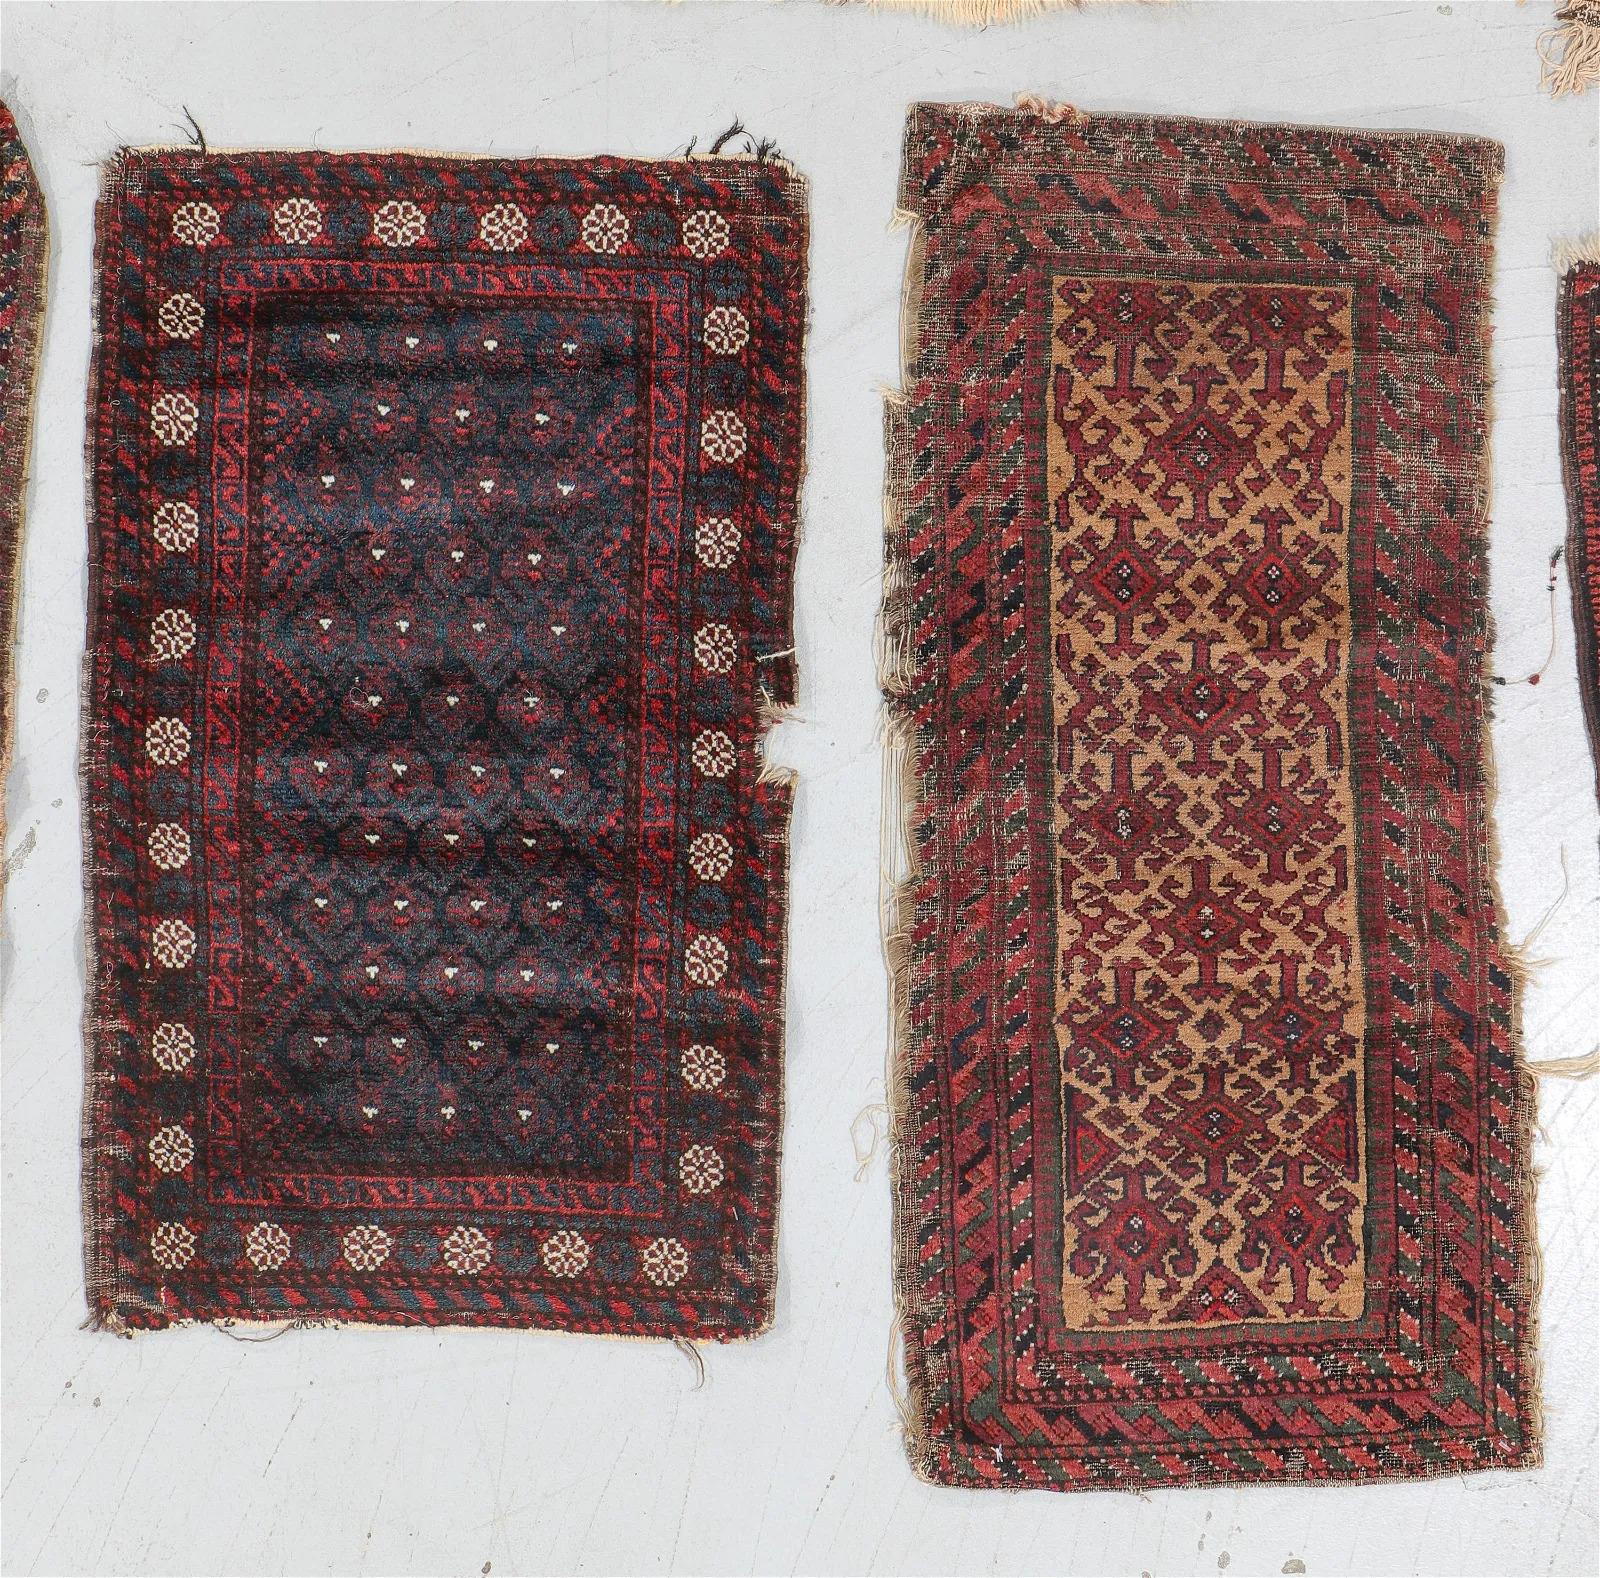 Lot of 9 Antique Afghan Baluch Collectible Rugs 1.6' x 3.2', 1870s - 2B29 For Sale 1